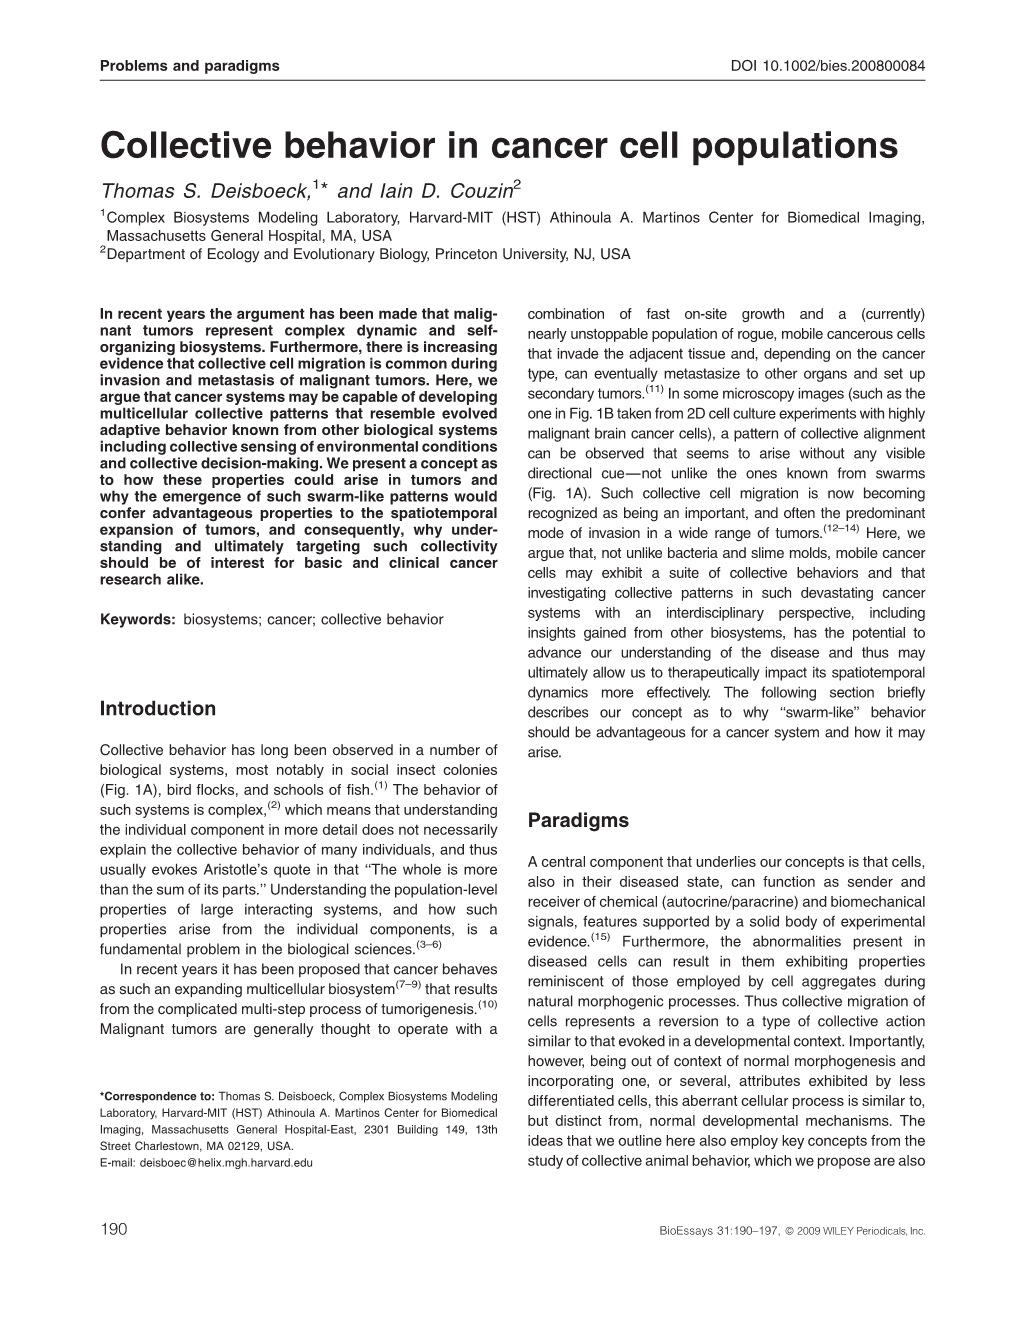 Collective Behavior in Cancer Cell Populations Thomas S